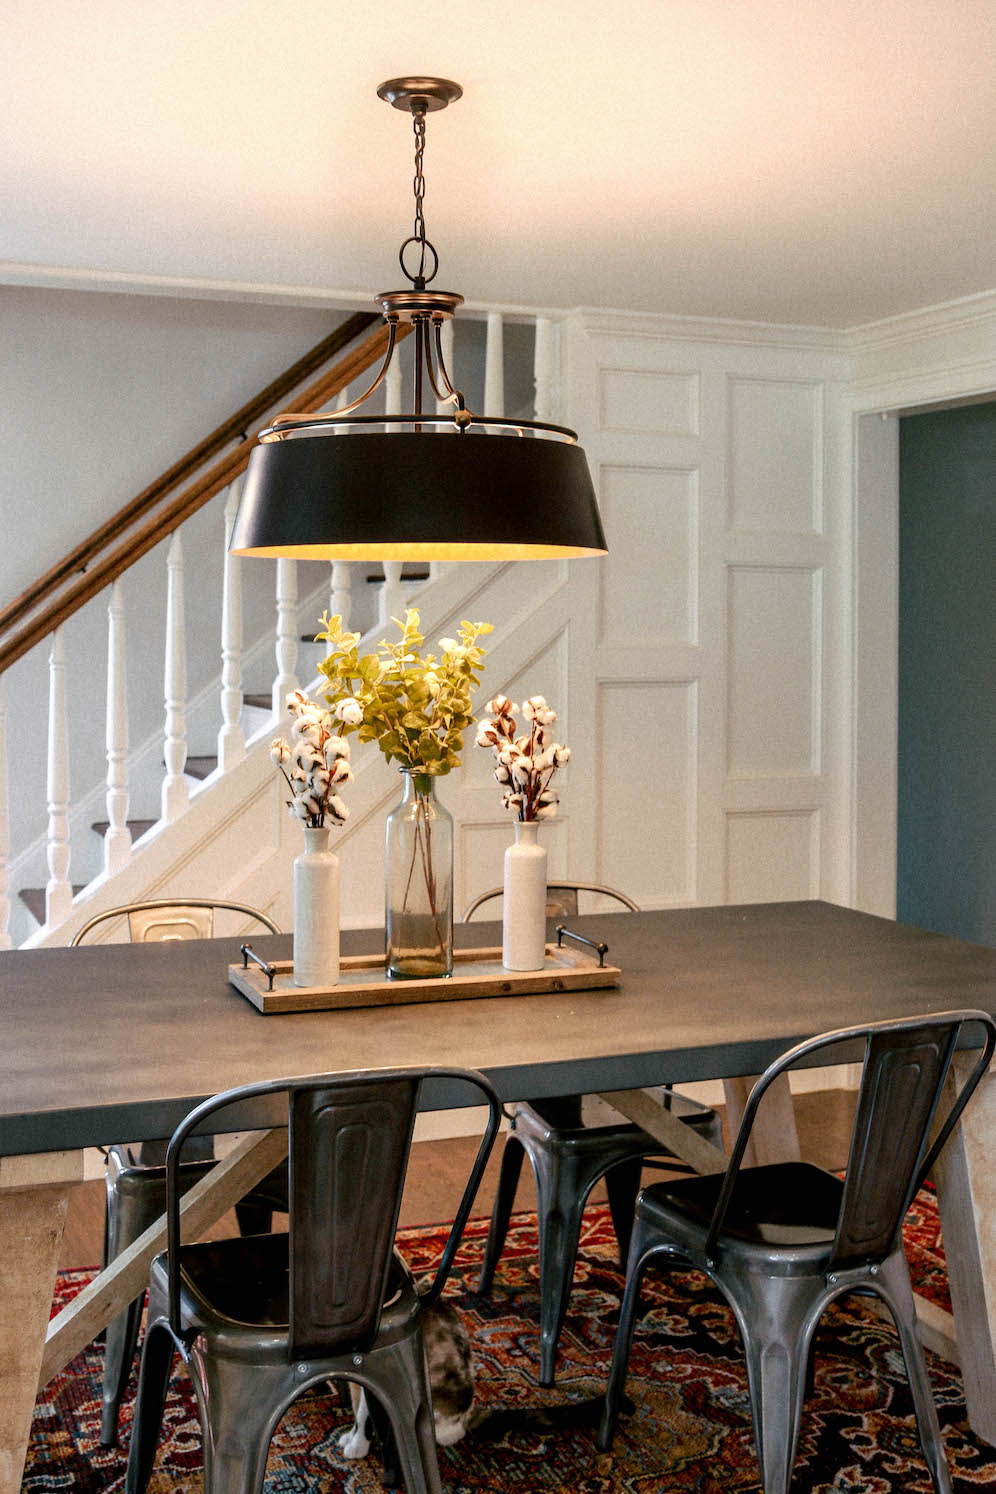 Light Fixtures Used Within Our New England Fixer-Upper The Coastal Confidence Aubrey Yandow